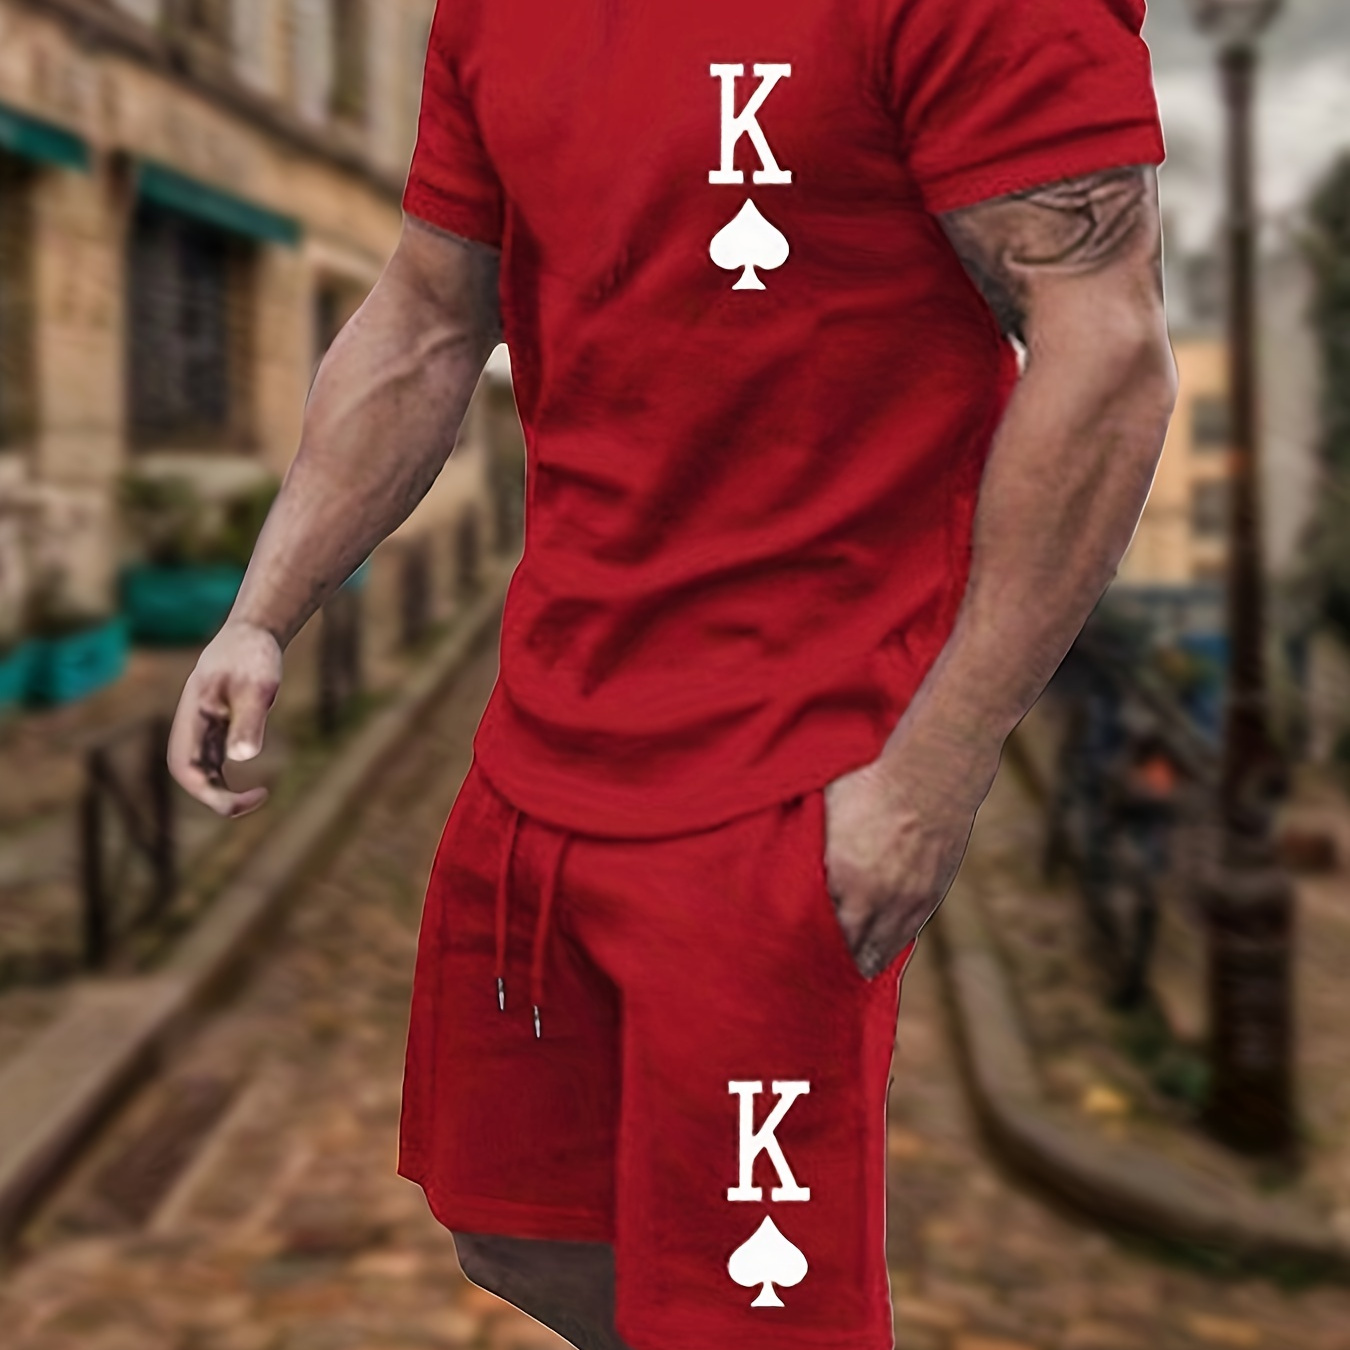 

King Of Spades Pattern Print, 2pcs Outfits For Men, Casual Crew Neck Short Sleeve T-shirt And Drawstring Shorts Set For Summer, Men's Clothing Loungewear Vacation Workout